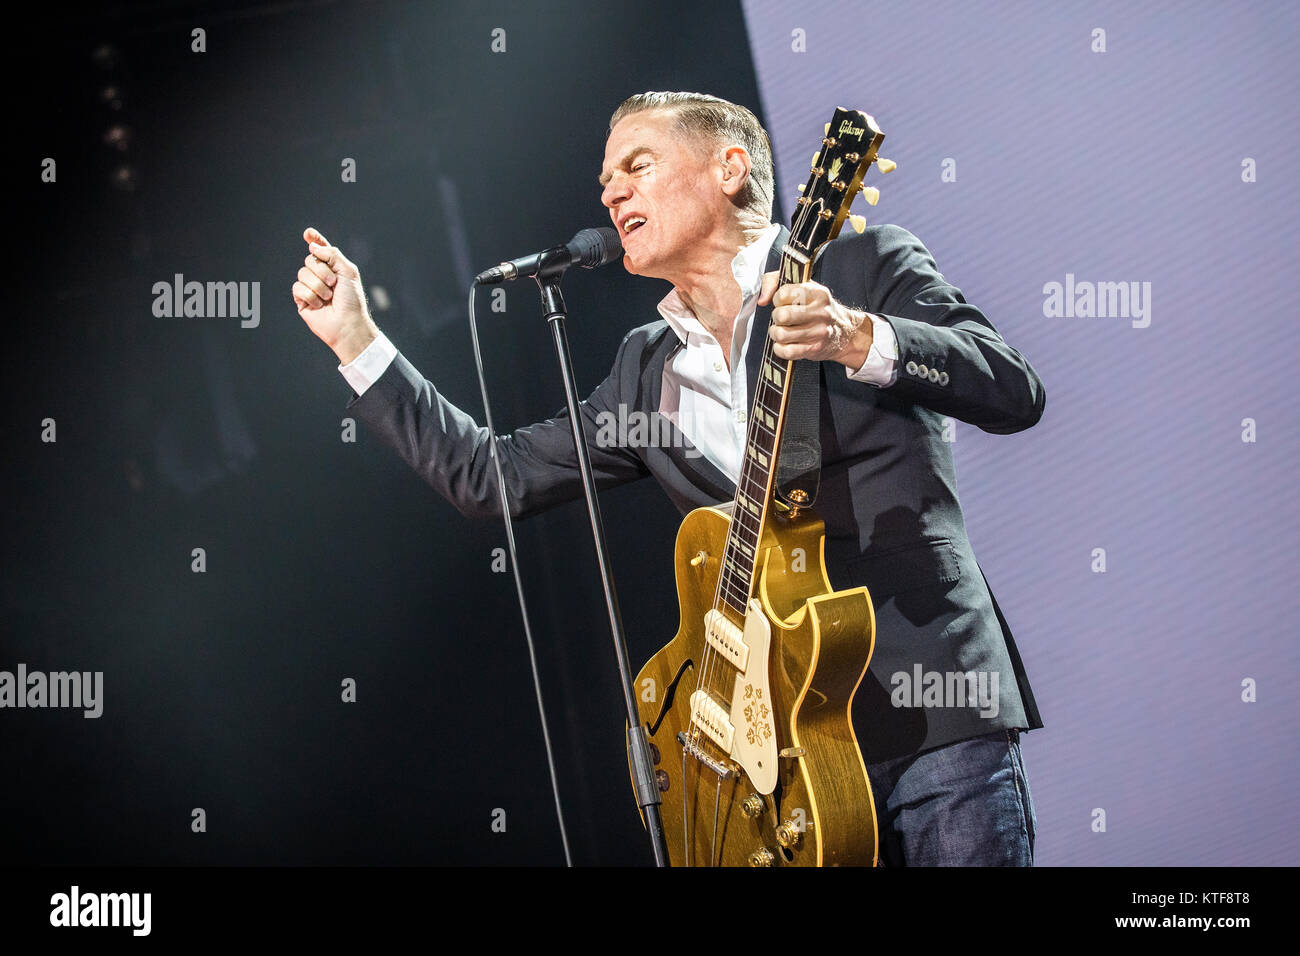 The Canadian singer, songwriter and musician Bryan Adams performs a live at Oslo Spektrum. Norway, 09/02 2017. Stock Photo